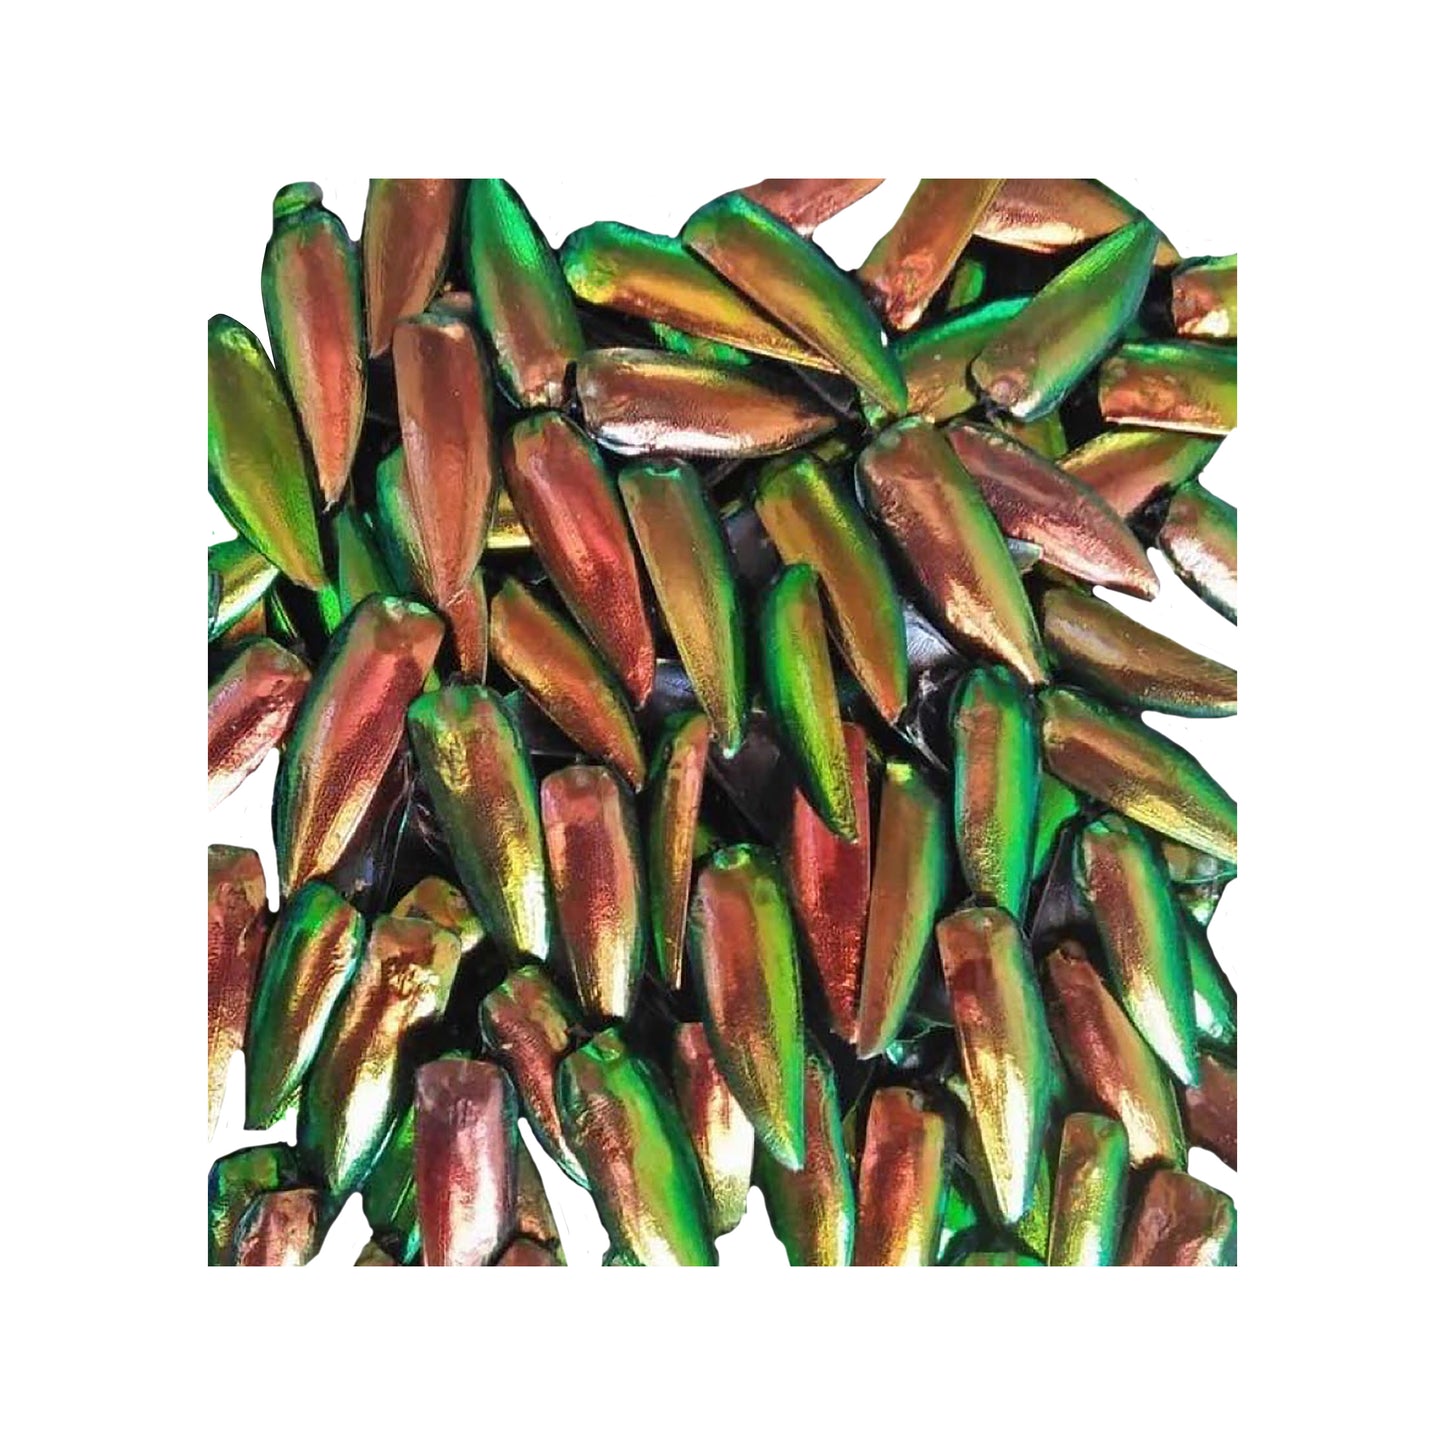 Jewel Beetle Wings UNDRILLED NO-HOLE 100 Pcs Natural Wings - REDDISH Green